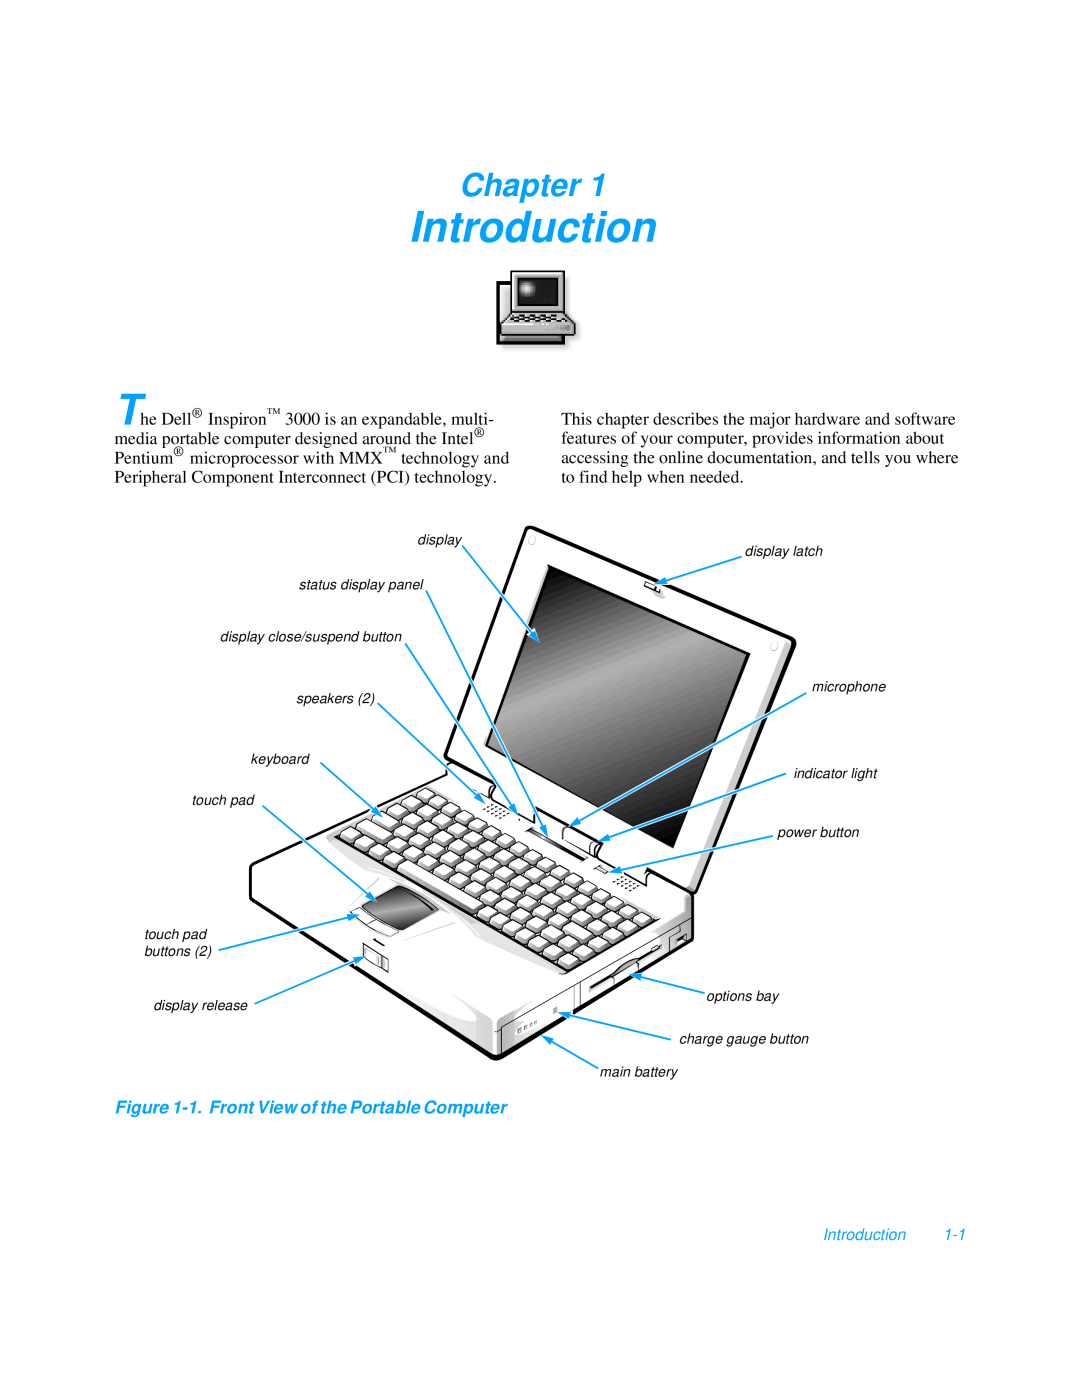 Dell 3000 manual Introduction, Chapter, 1. Front View of the Portable Computer 